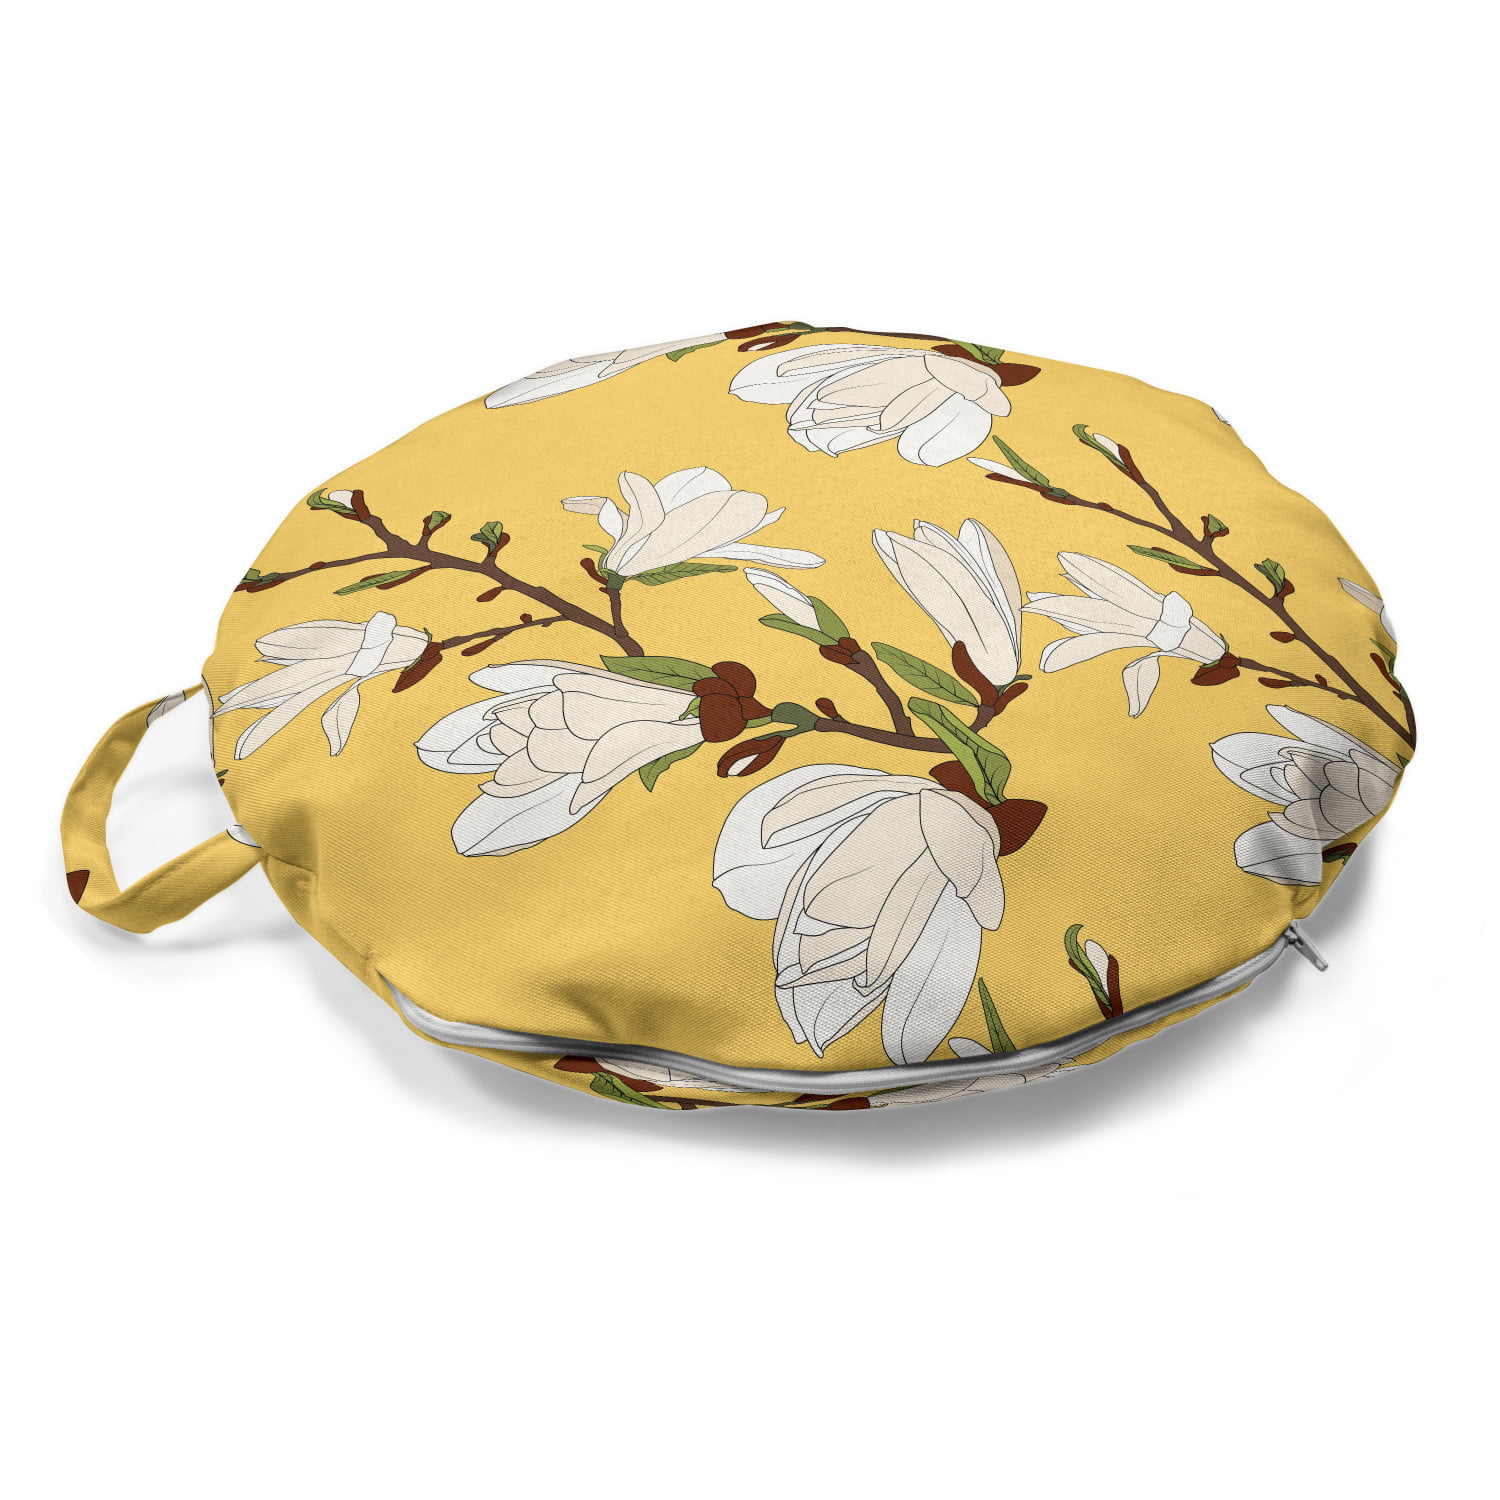 Decorative Pillow for Living Room & Dorms Ambesonne Floral Round Floor Cushion with Handle Ceil Blue and White Colored Meadow Flowers Leaves in Spring Garden 18 Round Fern Green and Multicolor